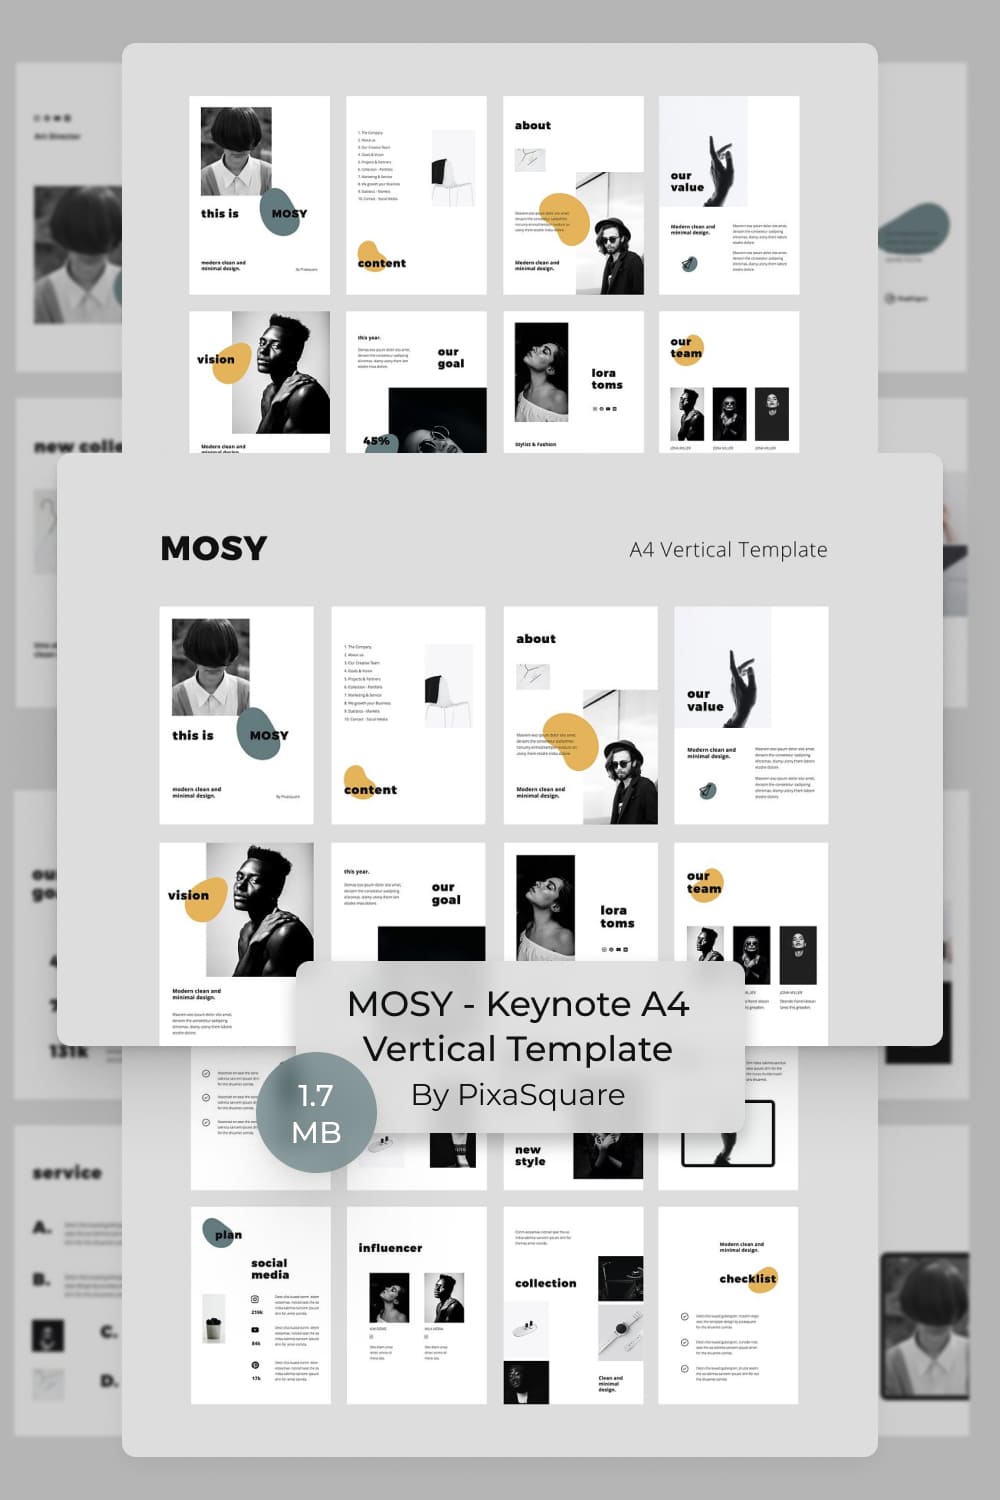 MOSY - Keynote A4 Vertical Template by MasterBundles Pinterest Collage Image.